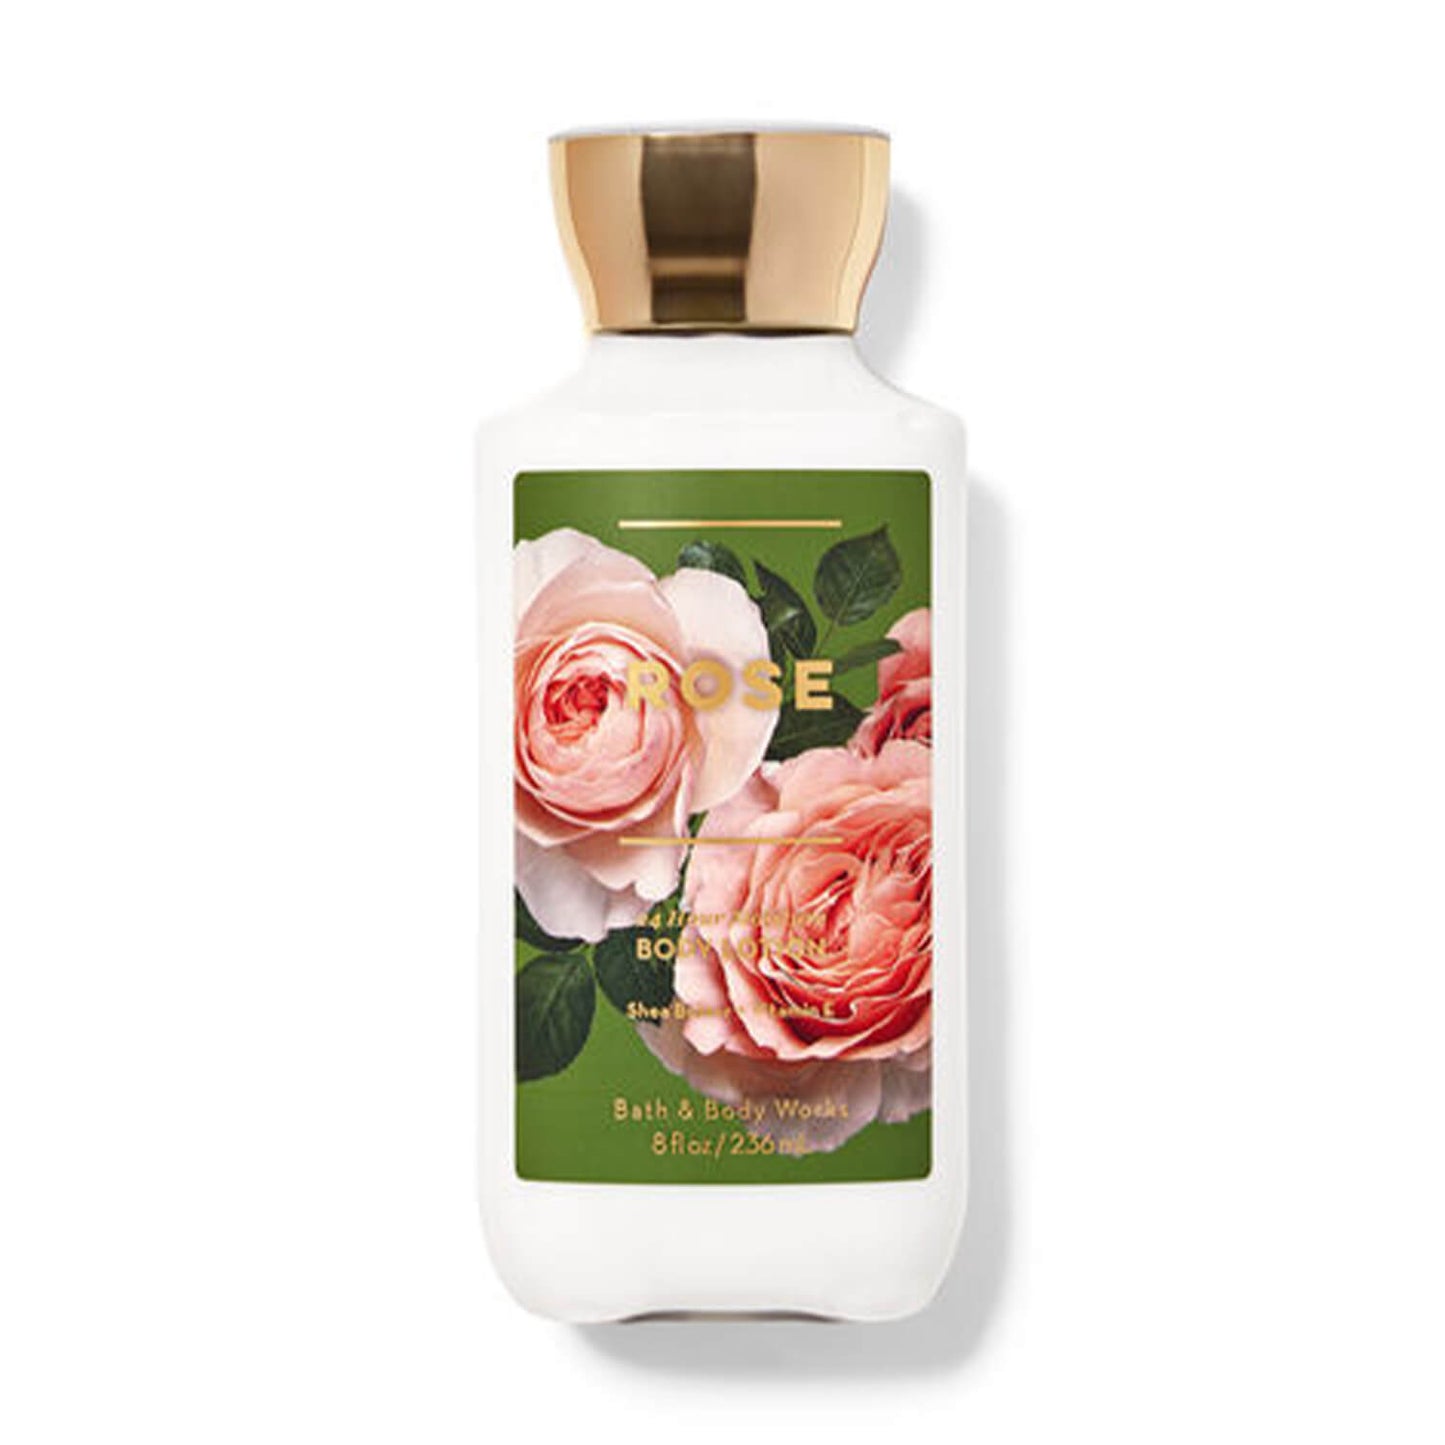 shop bath and body works lotion in rose fragrance available at heygirl.pk for delivery in Pakistan